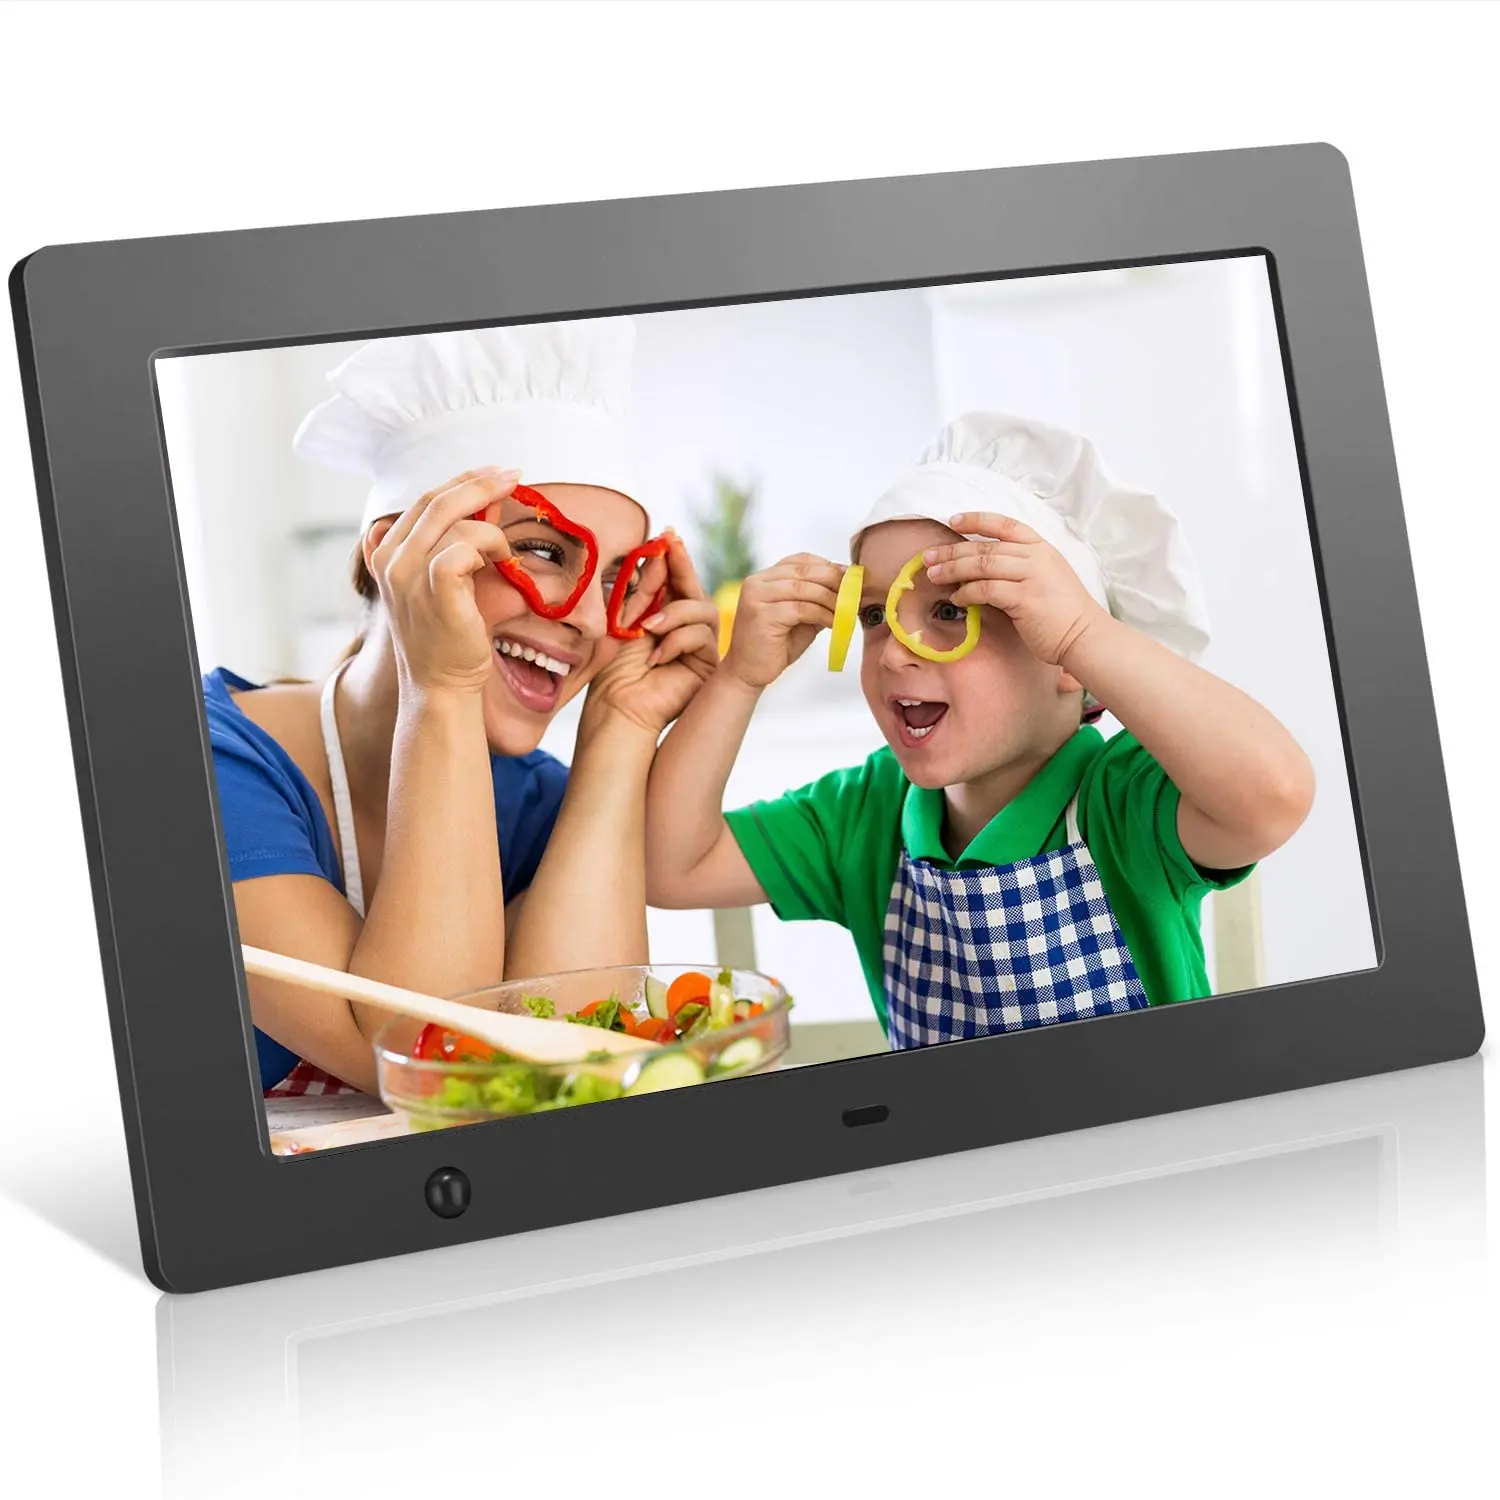 

pay now with discount Usb Driver Multi Functional Video Advertising 8'/8.2' IPS FHD touchscreen wifi digital photo picture frame